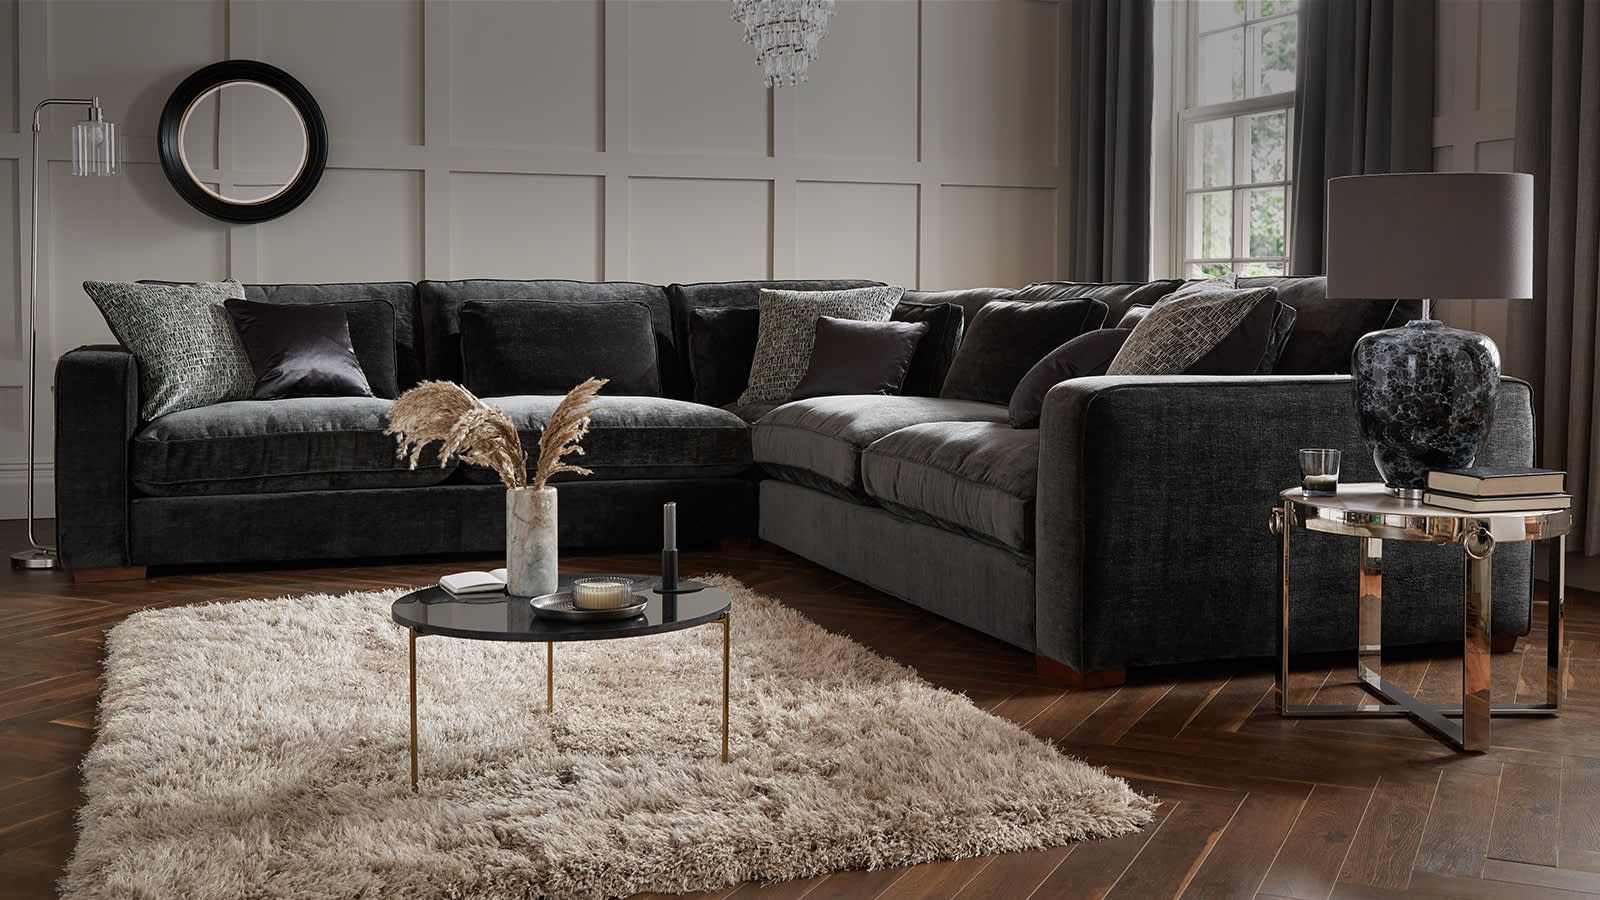 A Buying Guide For Corner Sofas | Sofology Throughout Microfiber Sectional Corner Sofas (View 5 of 15)